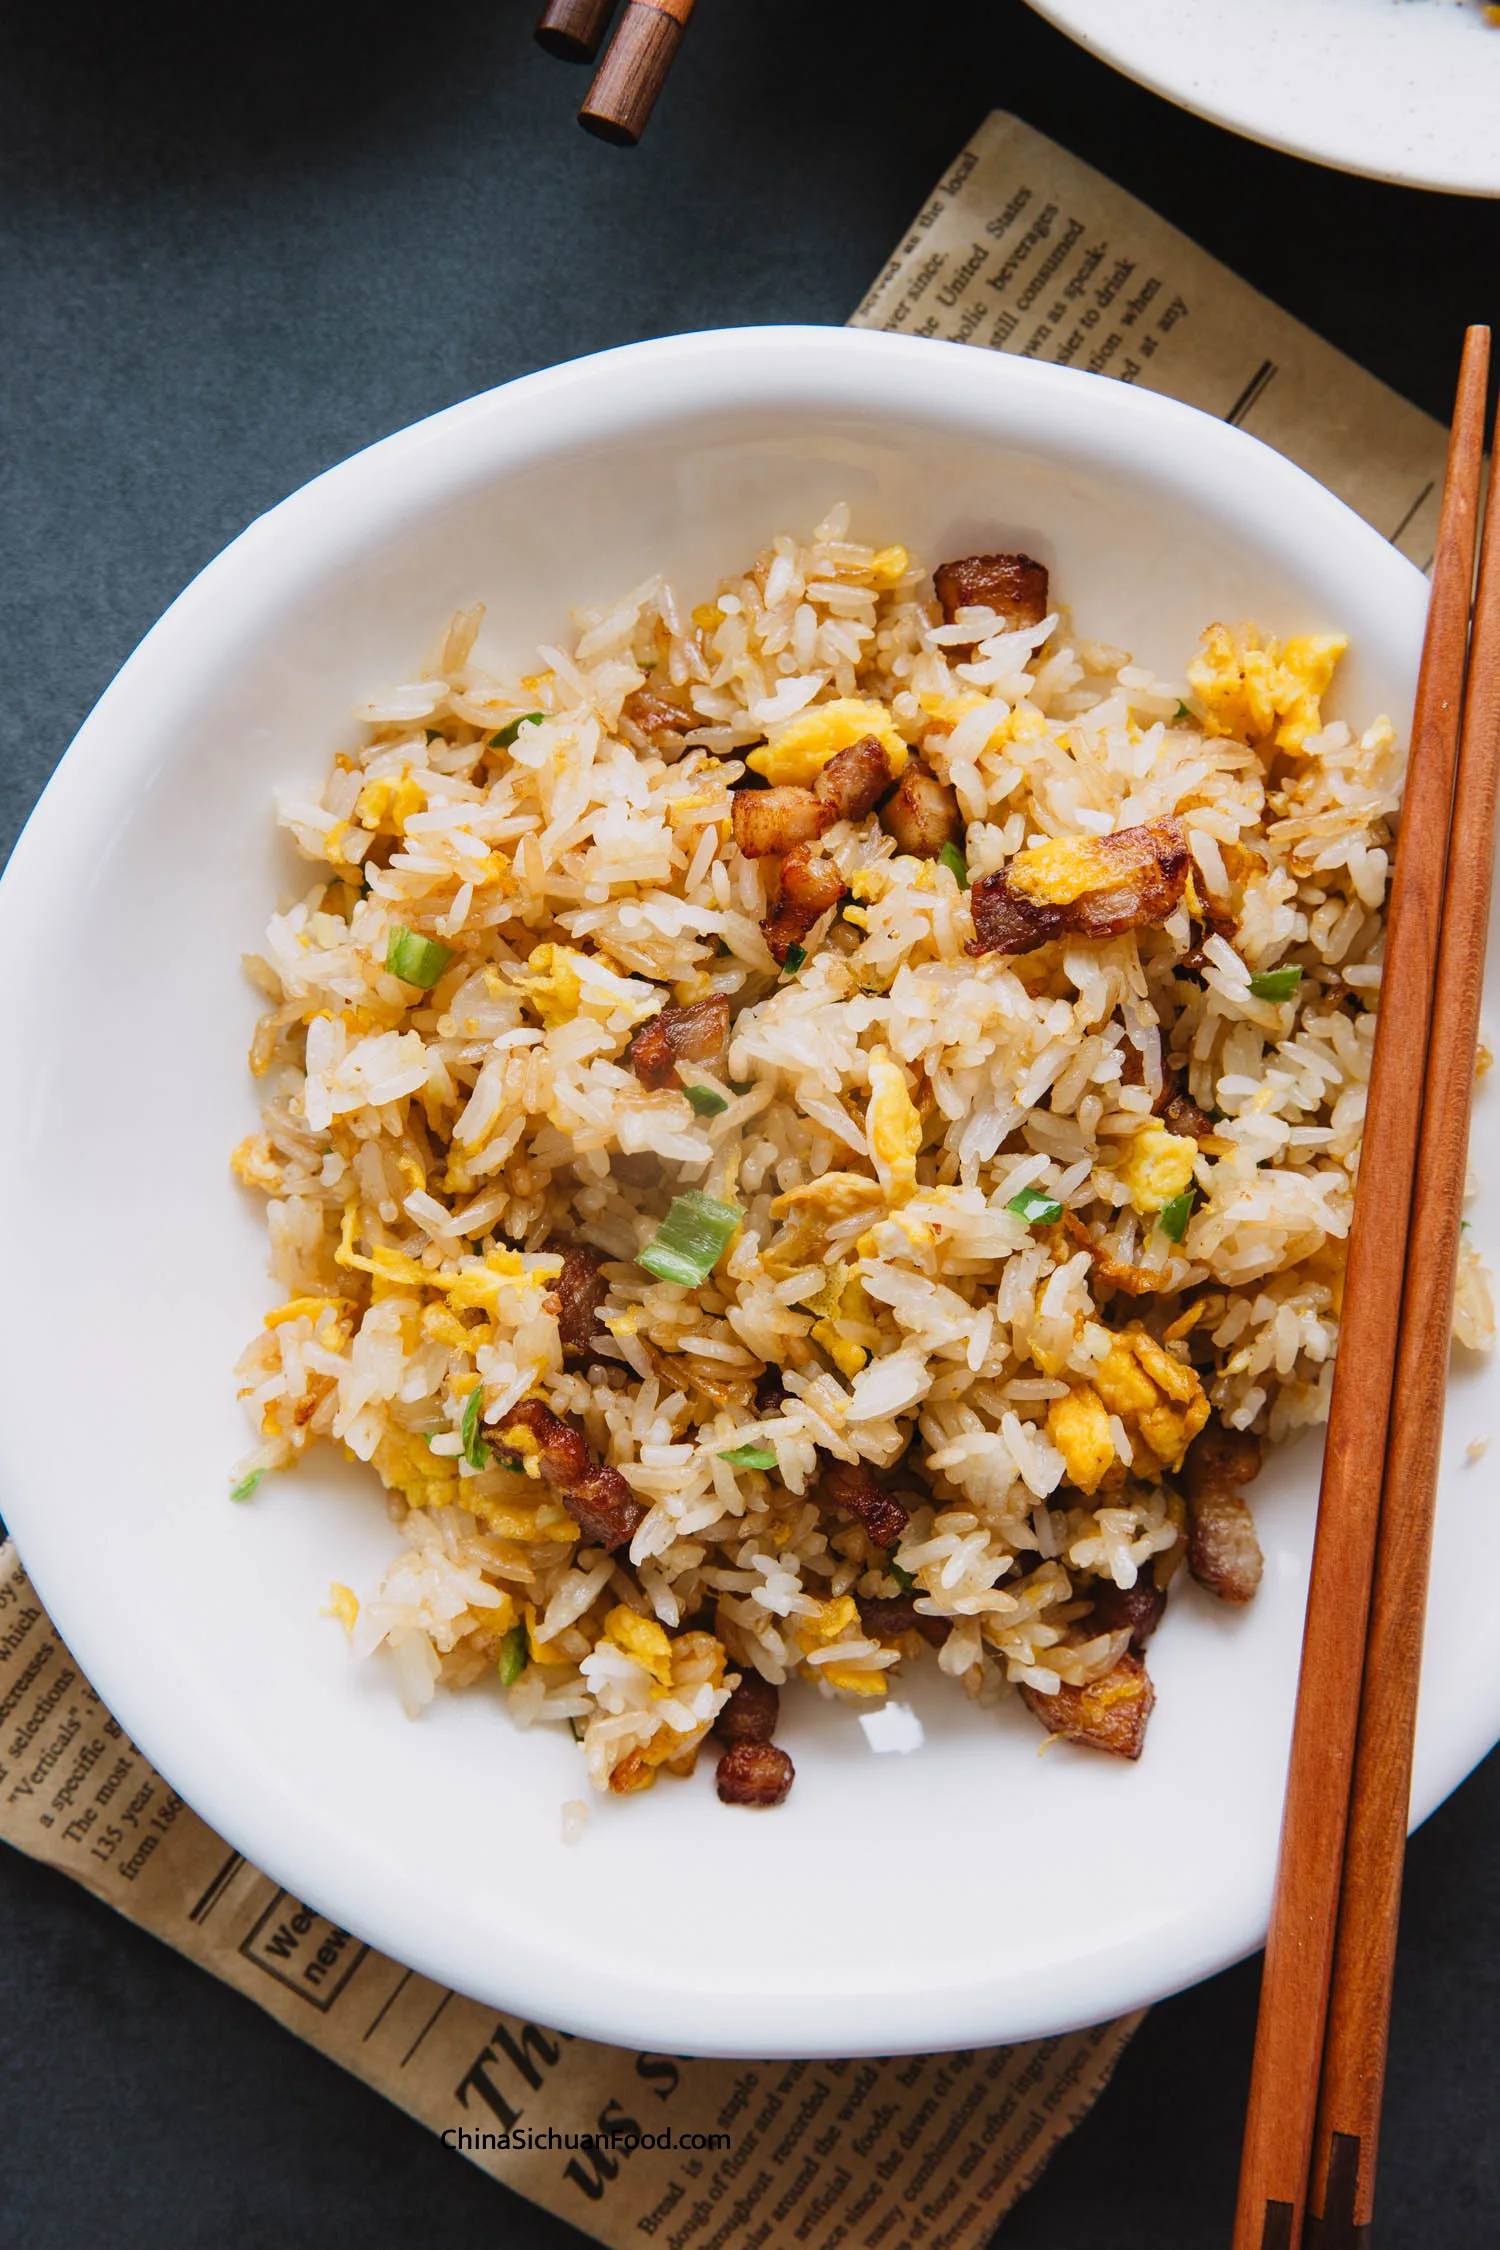 Pork Belly Fried Rice|ChinaSichuanFood.com